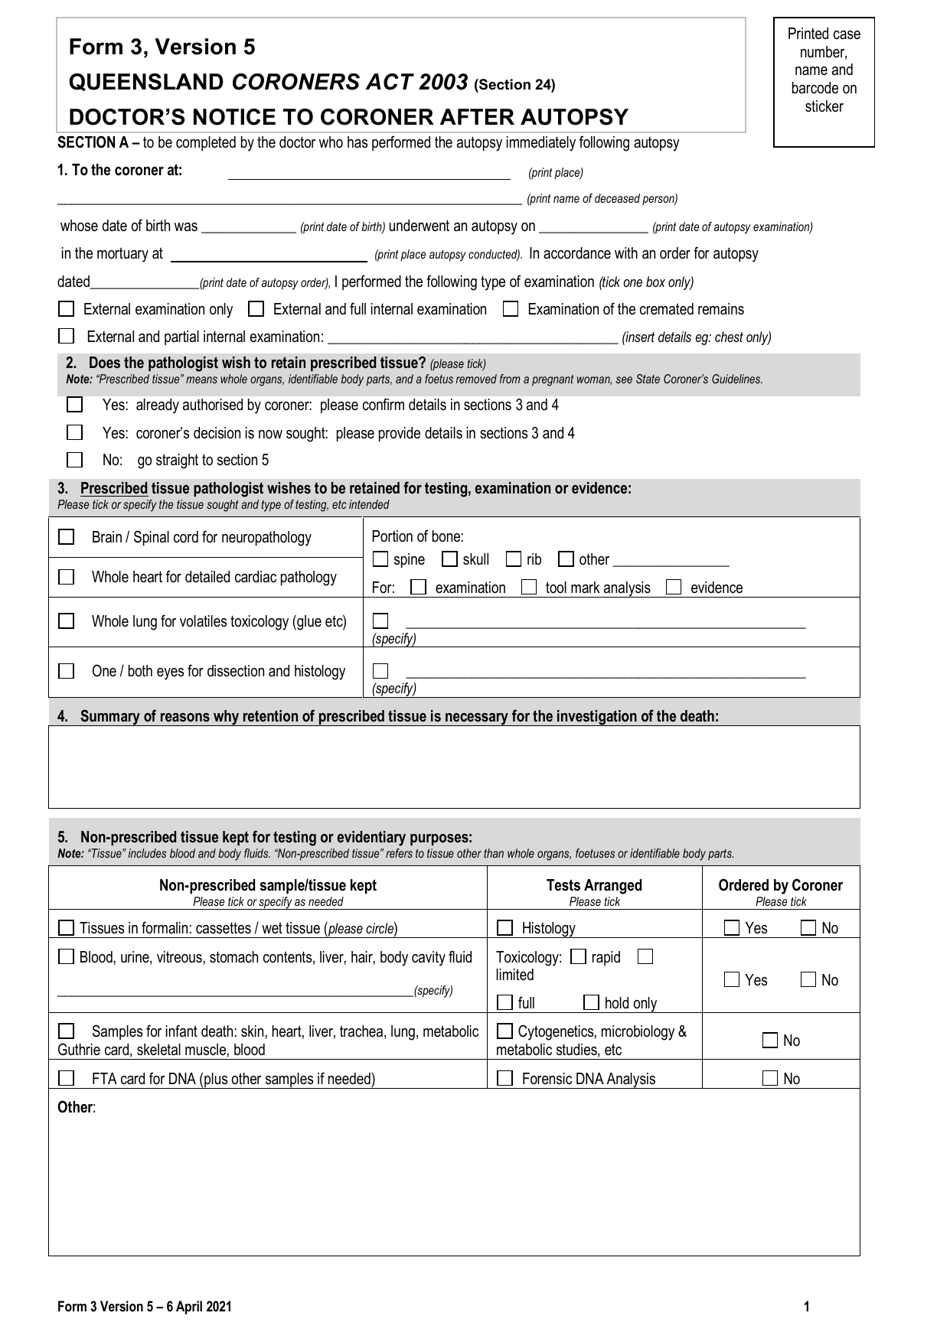 Form 3 Doctors Notice to Coroner After Autopsy - Queensland, Australia, Page 1